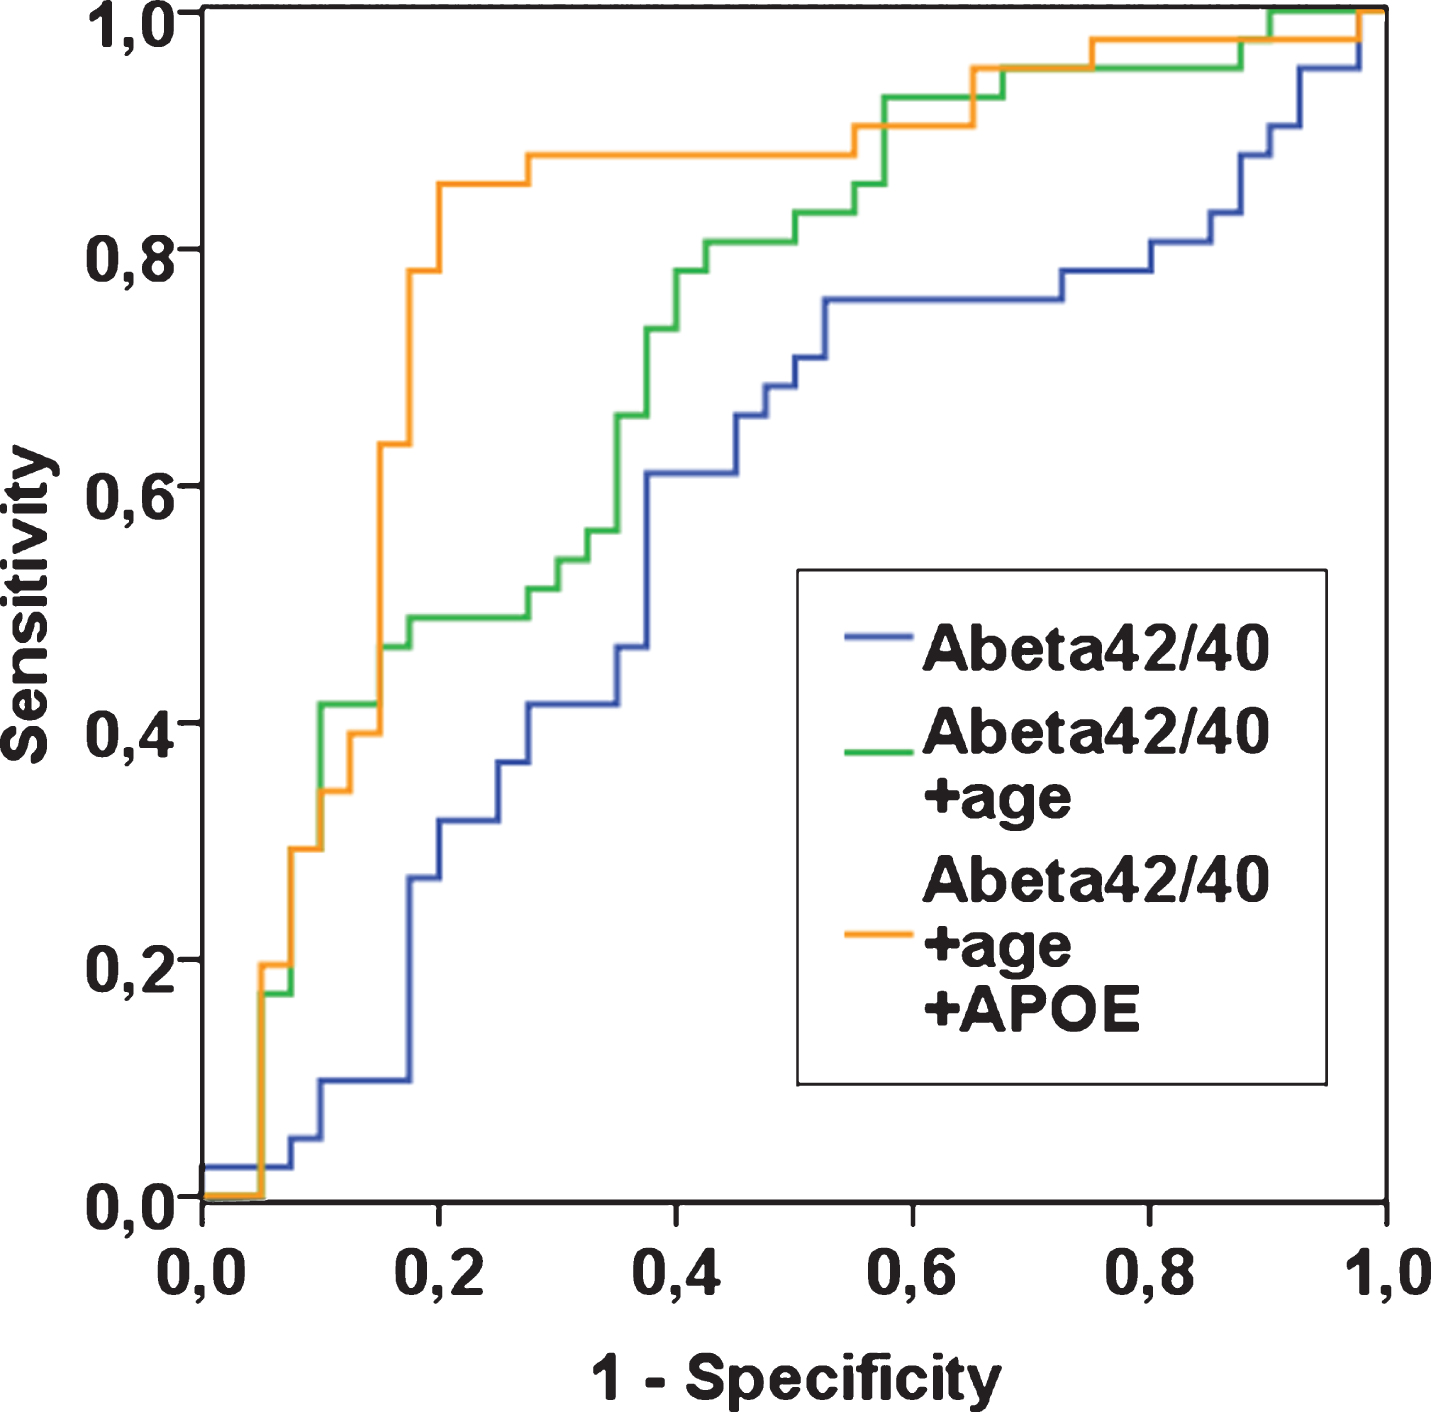 ROC curves for plasma Aβ42/40 alone, plasma Aβ42/40 with age, and plasma Aβ42/40 with age and APOE ɛ4, in n = 81 patients with complete data. Outcome is “AD” with reference “controls”. To create a ROC curve above the reference line, Aβ42/40 was transformed to “1- Aβ42/40” (blue line).